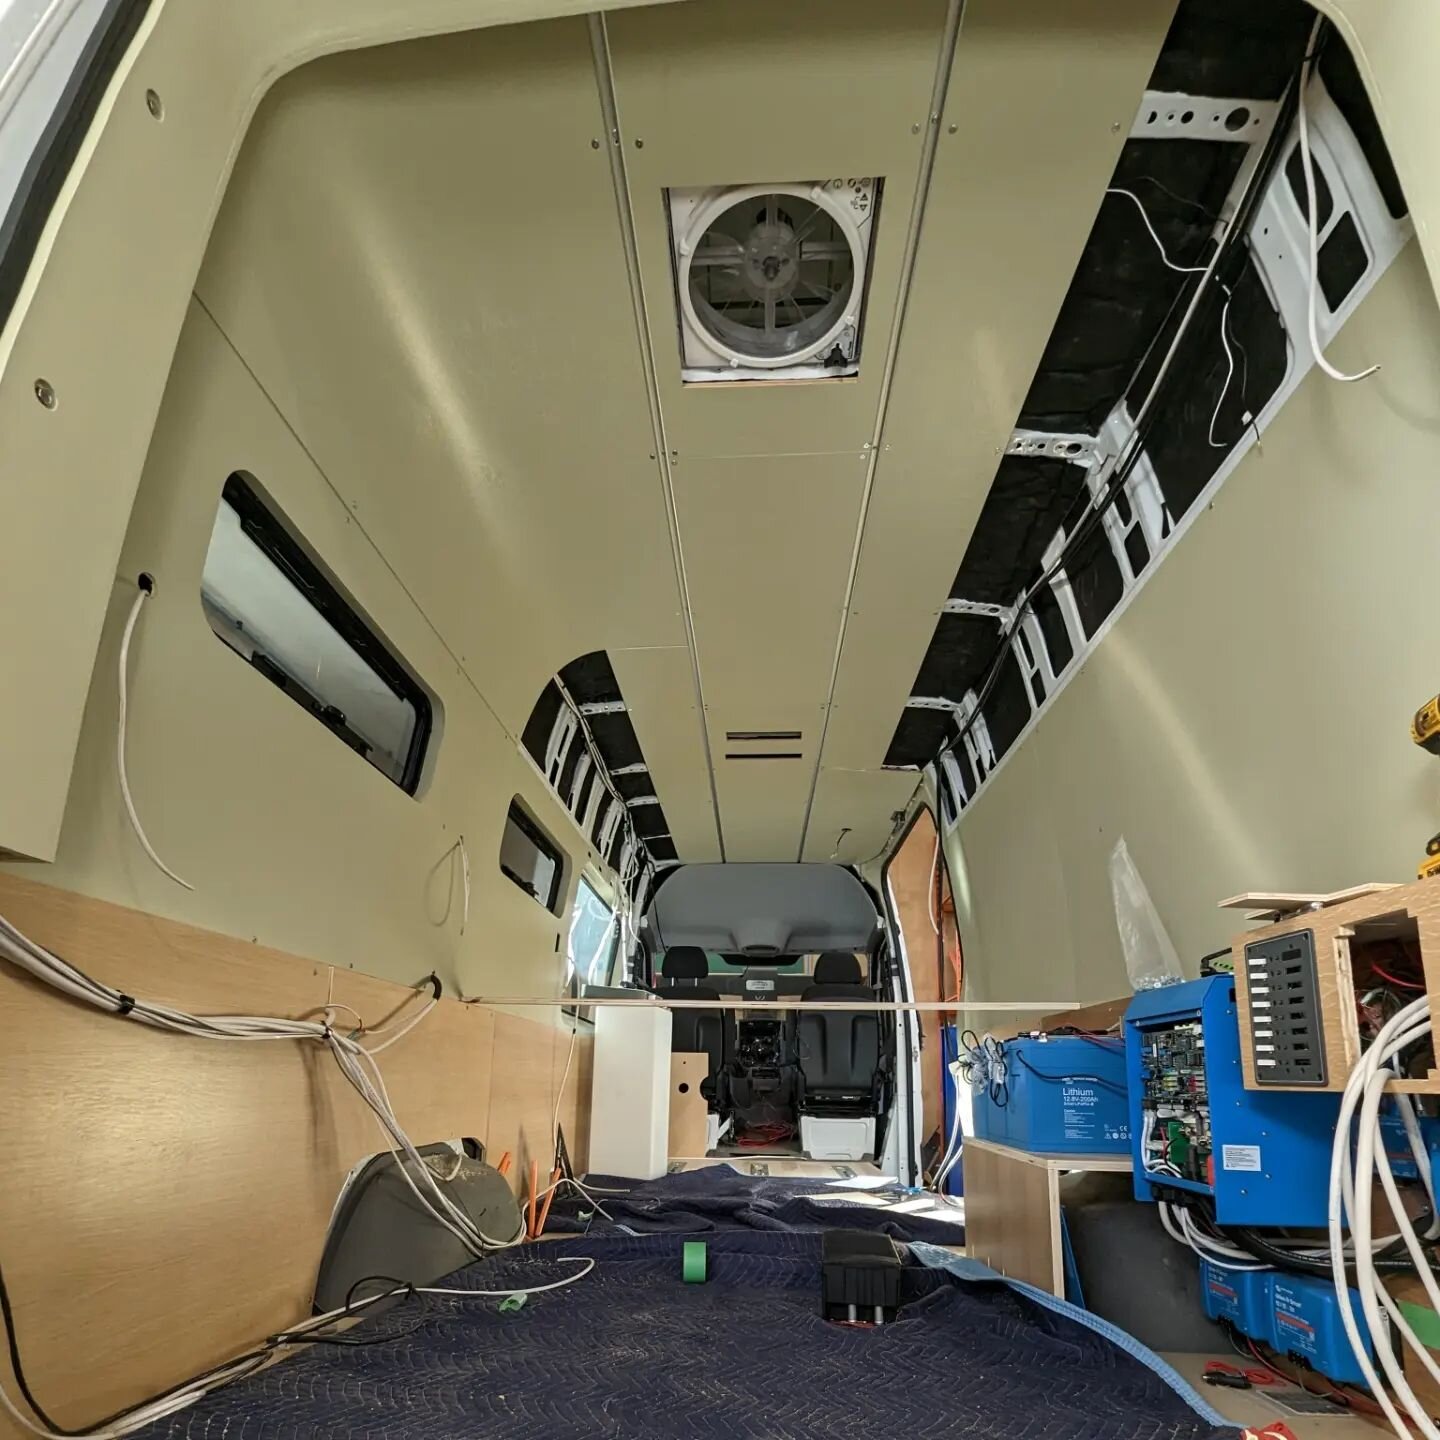 Progress photos! For our custom builds, we create a shared photo album with the owners so they get to see the process and have a record for down the road. Knowing how things went together can be handy! We want to transfer lots of knowledge to the van